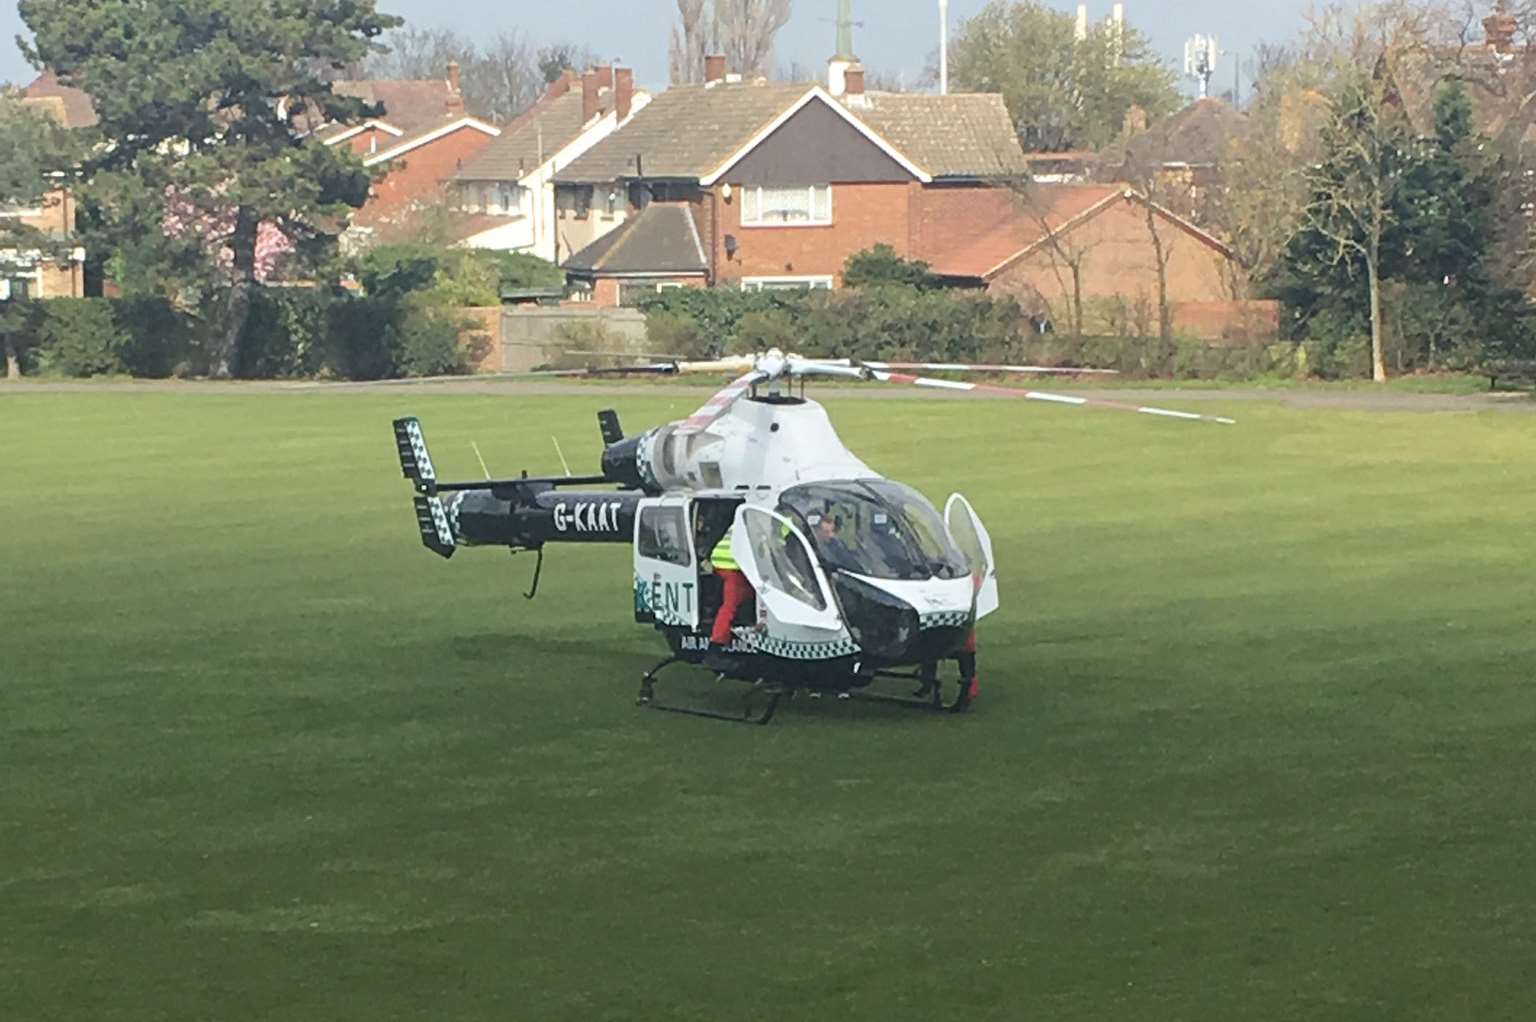 The air ambulance landed in Hesketh Park. Picture: @KateySmith89